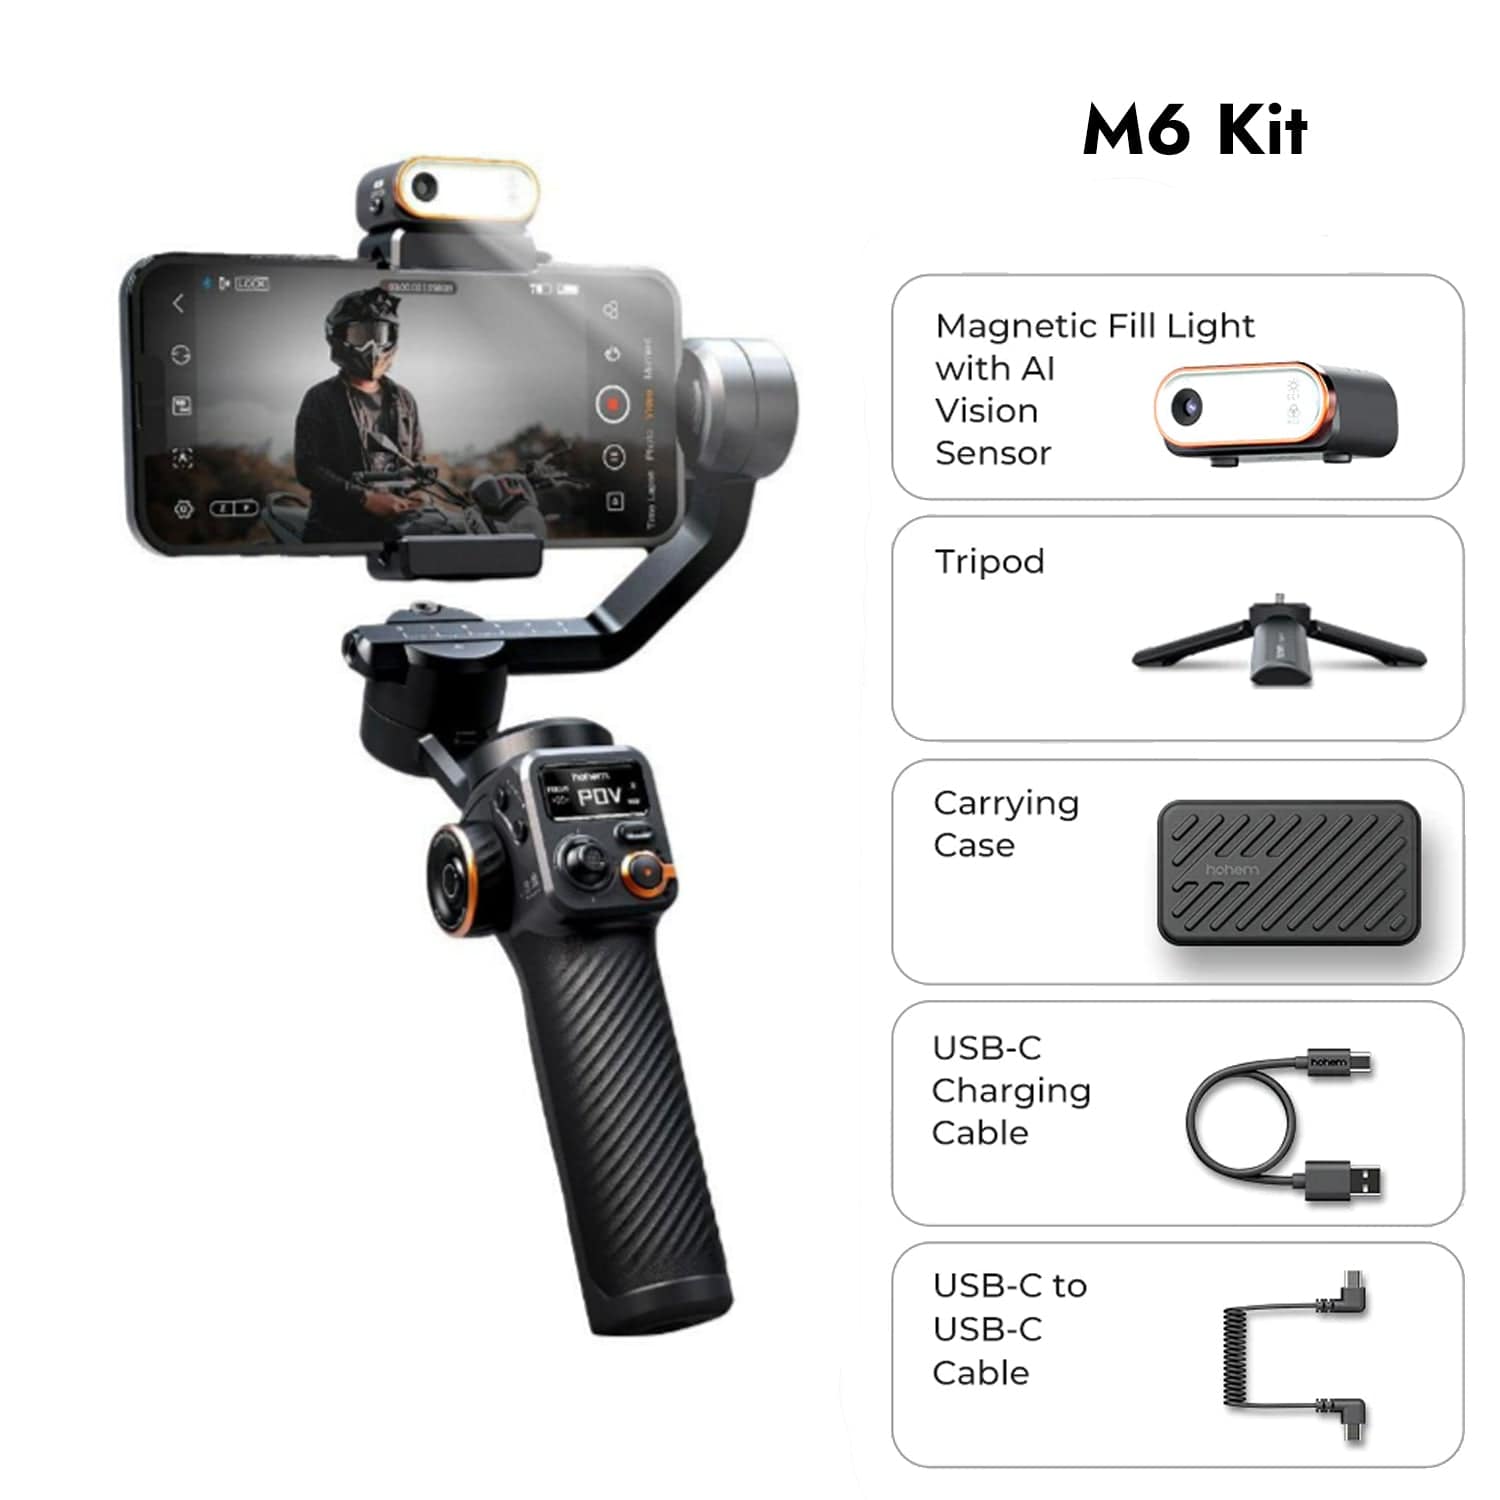 Hohem iSteady M6 Kit Gimbal Stabilizer Review